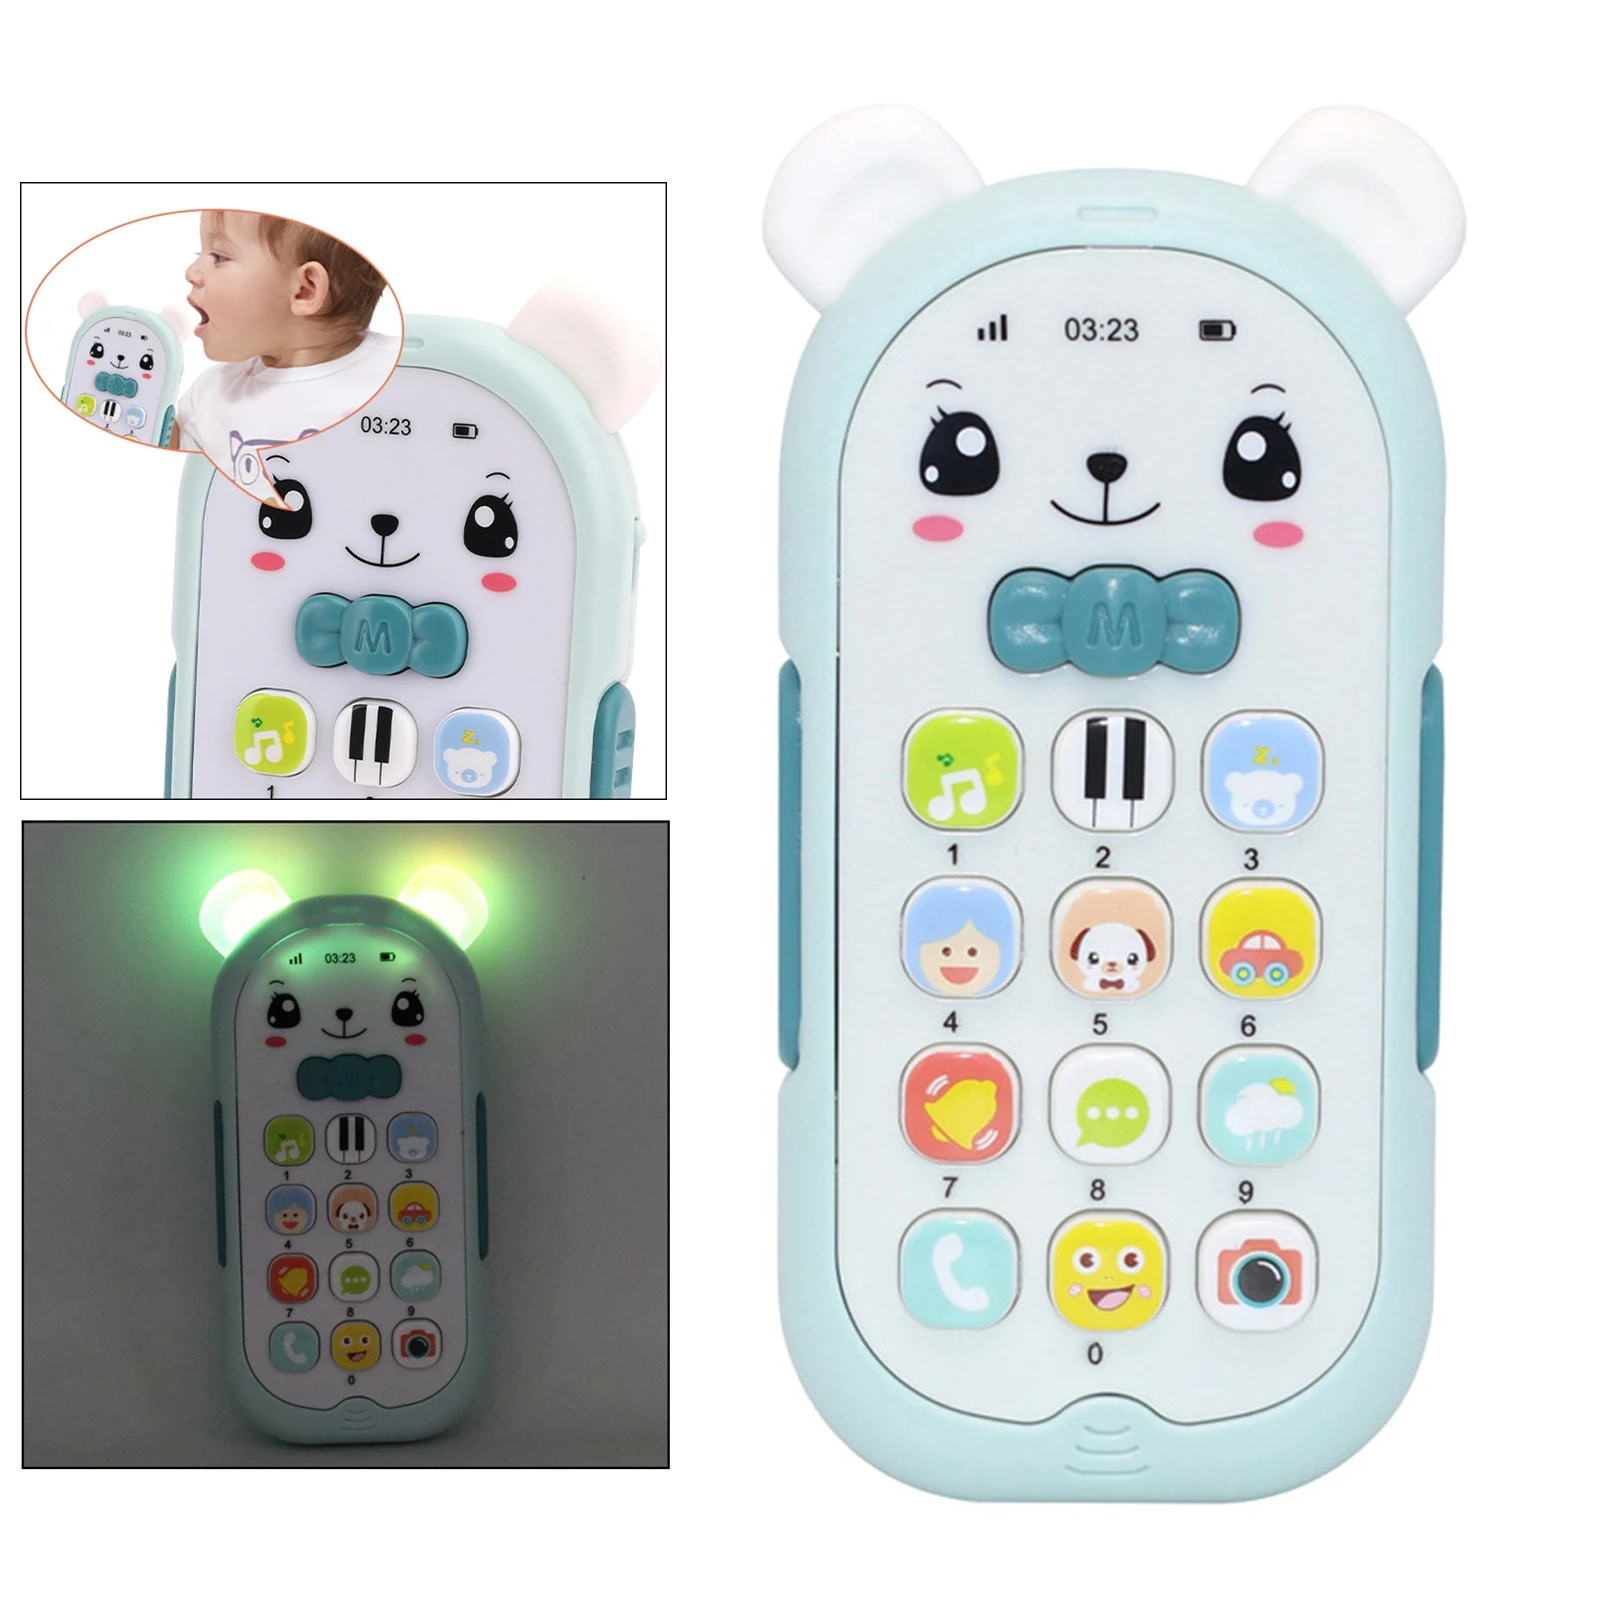 Infant Phone Toys Mobile Phone Early Educational Learning Machine Kids Gifts 